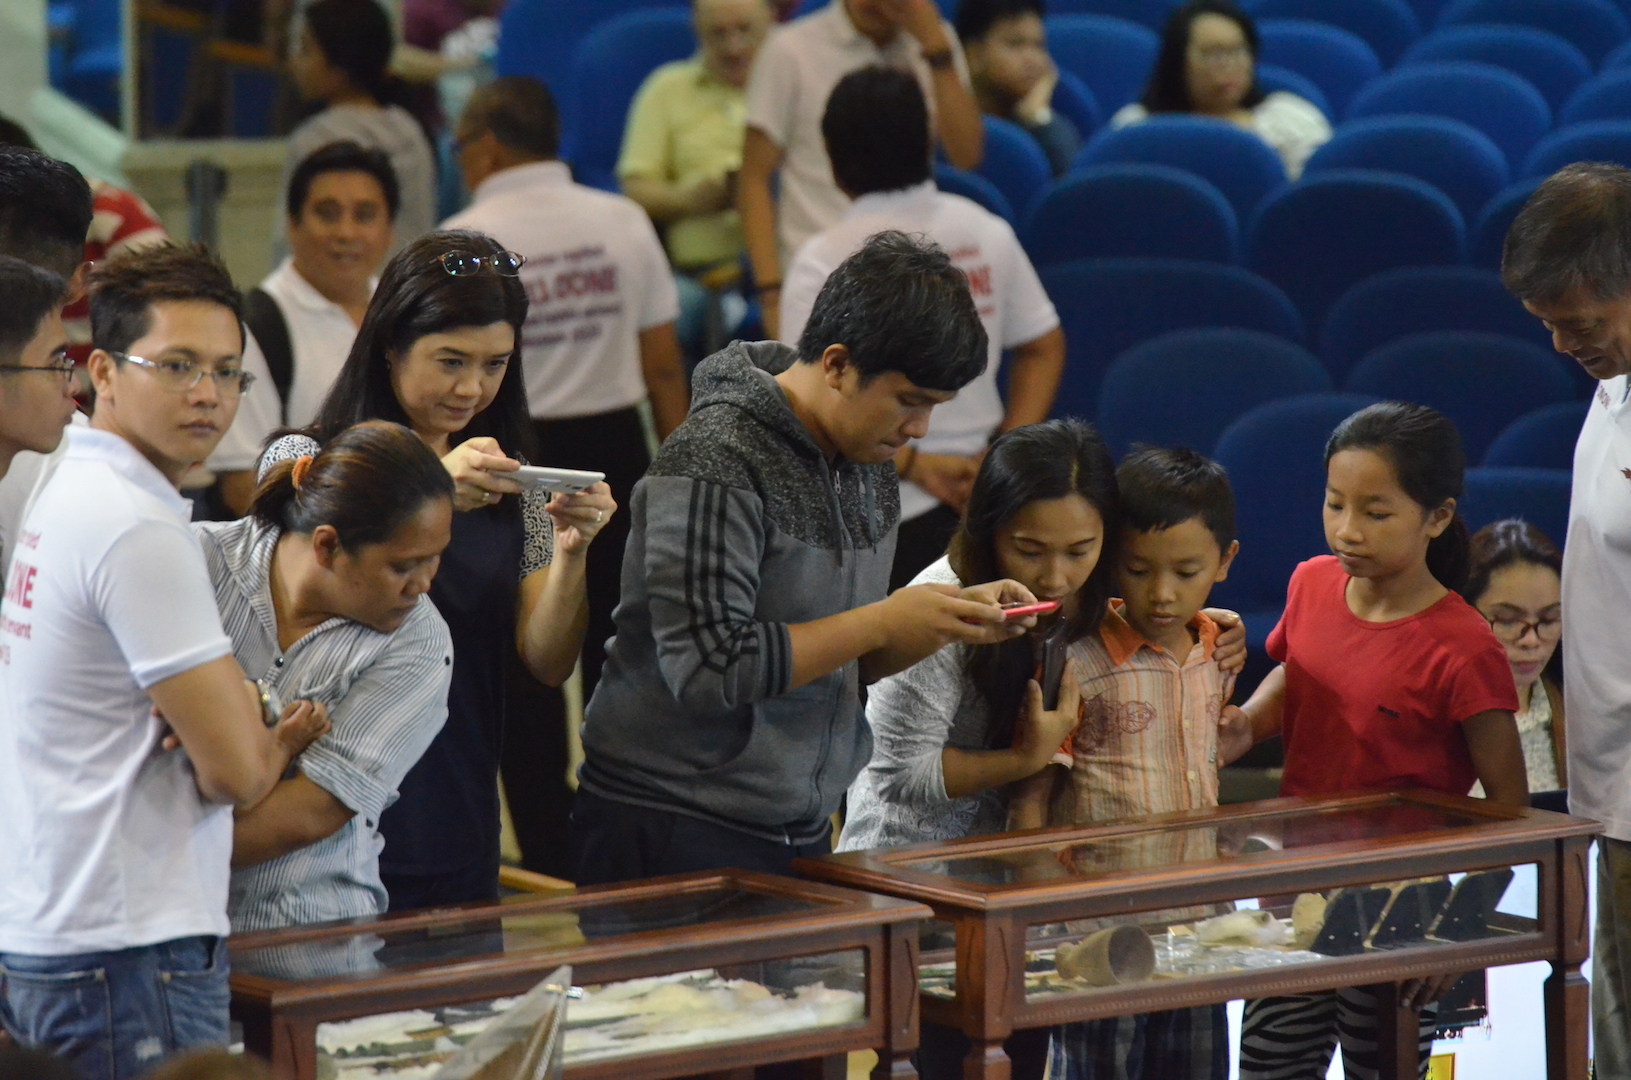 COP members taking pictures of the relics and artifacts in the mini exhibit of the School of the Cross